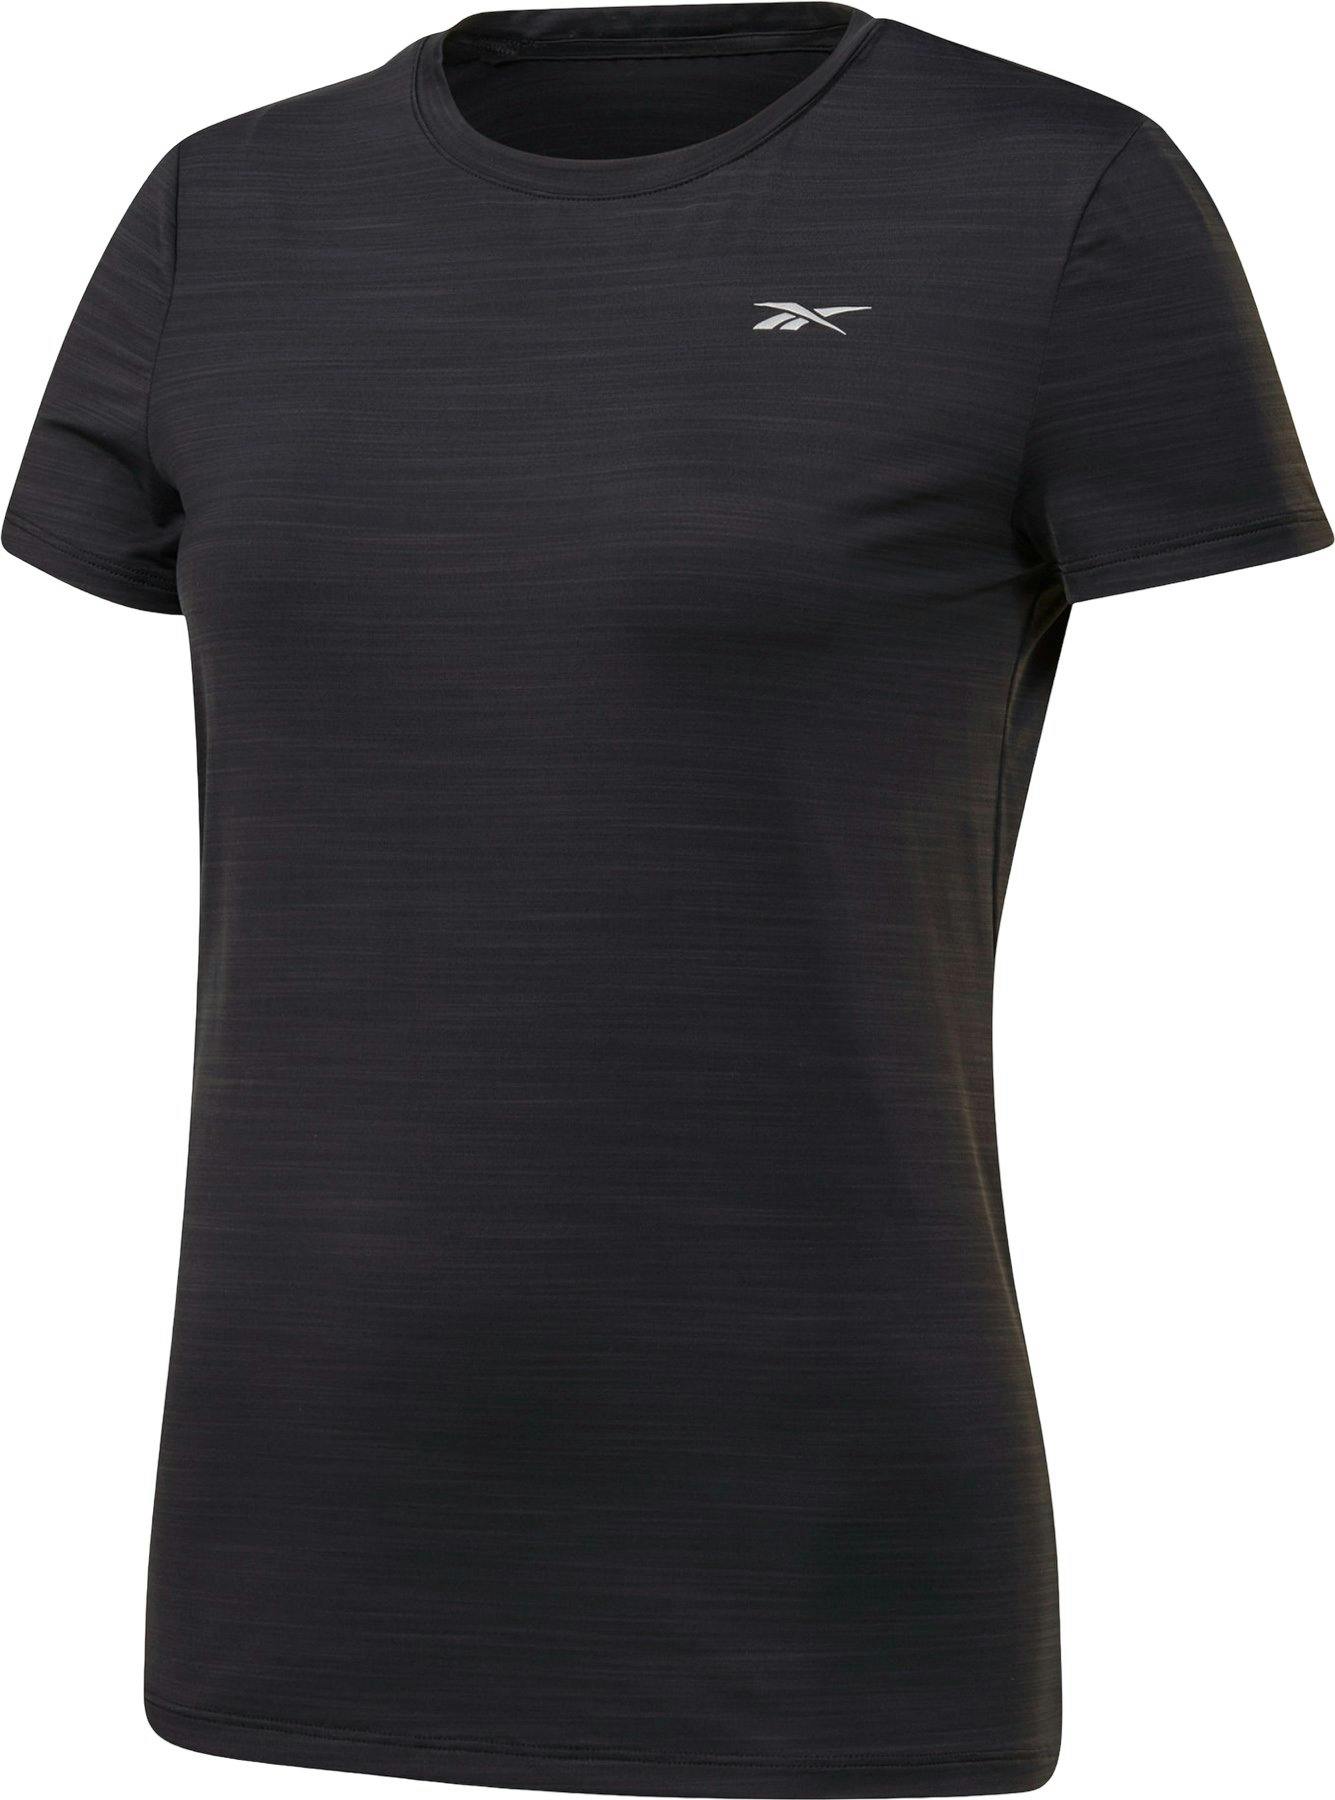 Product image for One Series Running ACTIVCHILL Short Sleeve T-Shirt - Women's